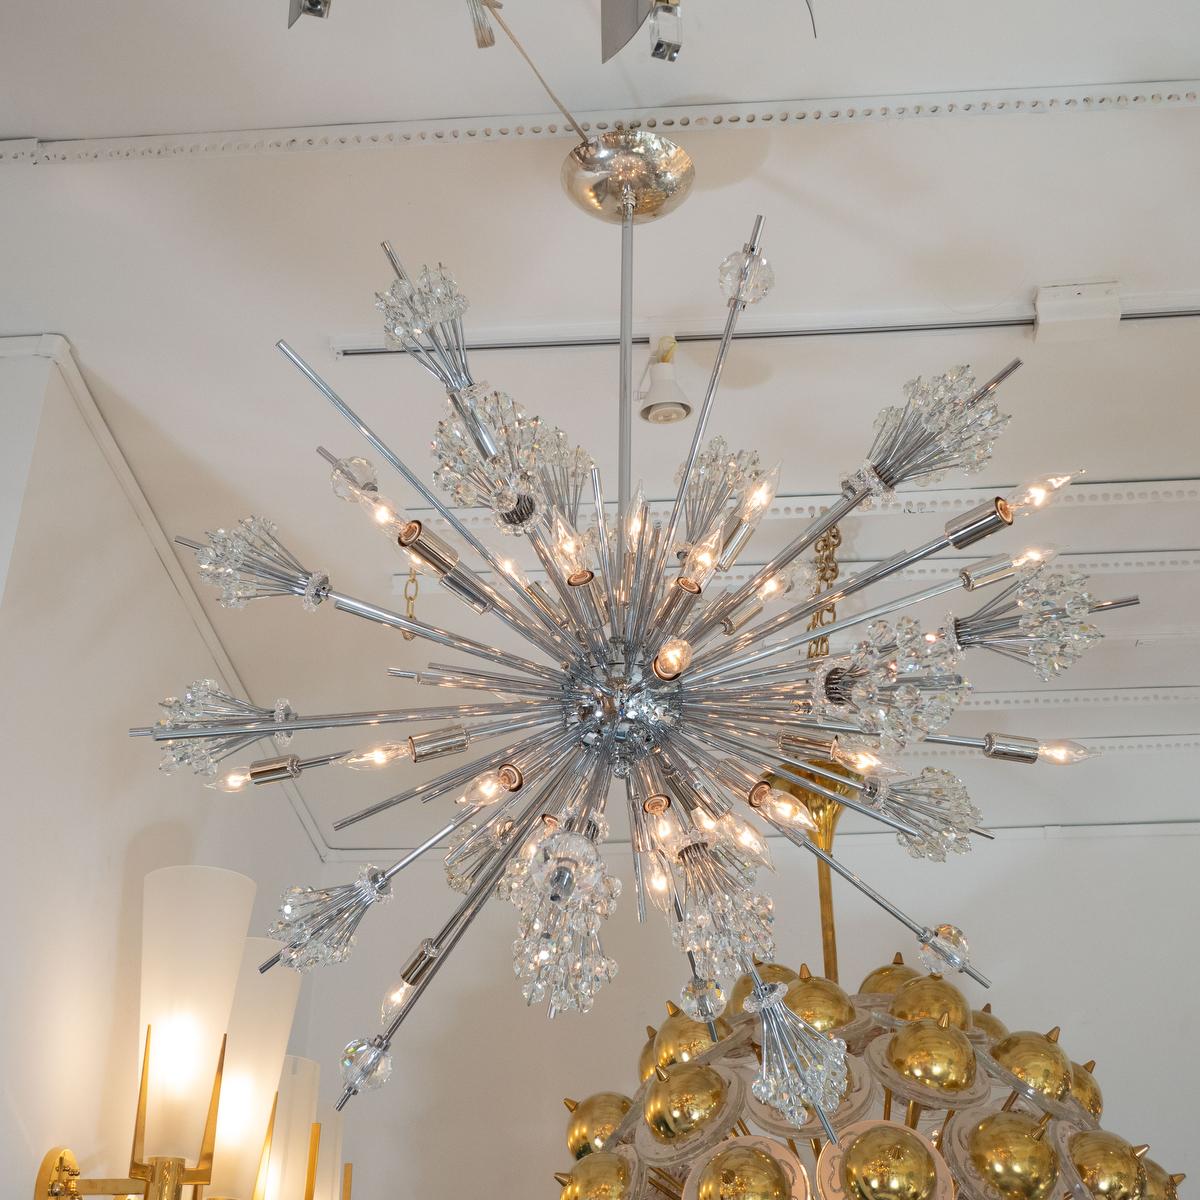 Chrome sputnik style chandelier with crystal clusters in the style of Lobmeyr.